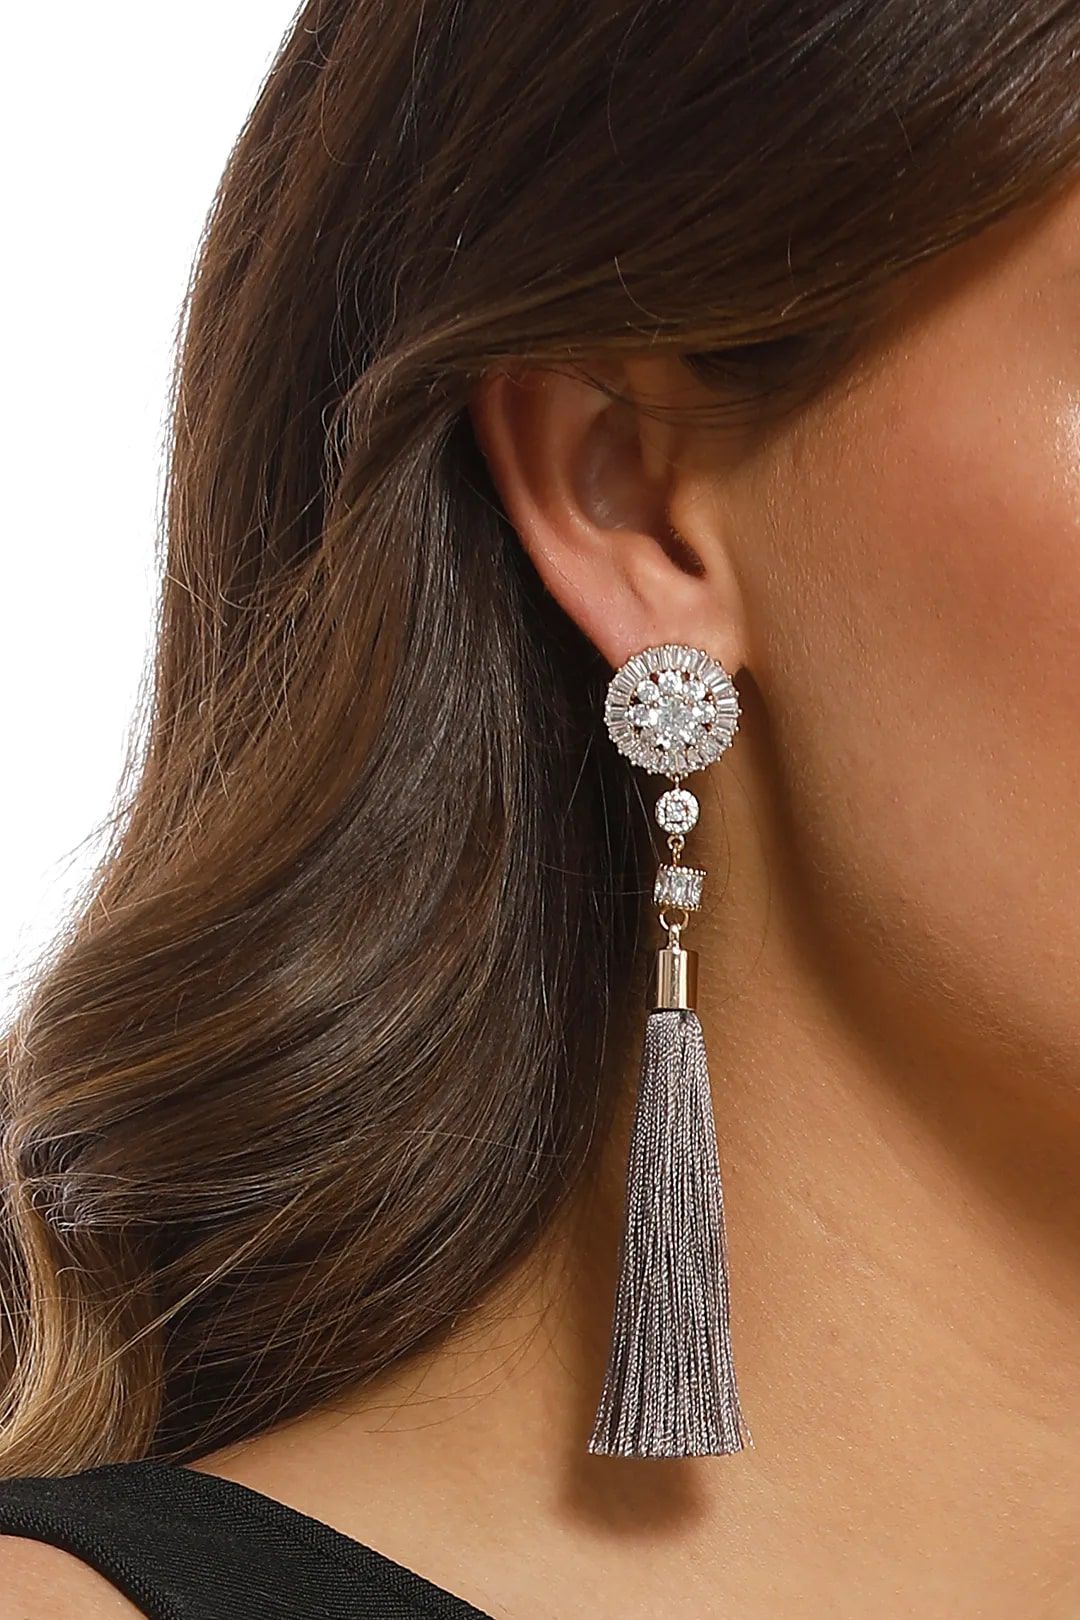 Baguette Jewel Top Tassel Earrings by Adorne, available for purchase